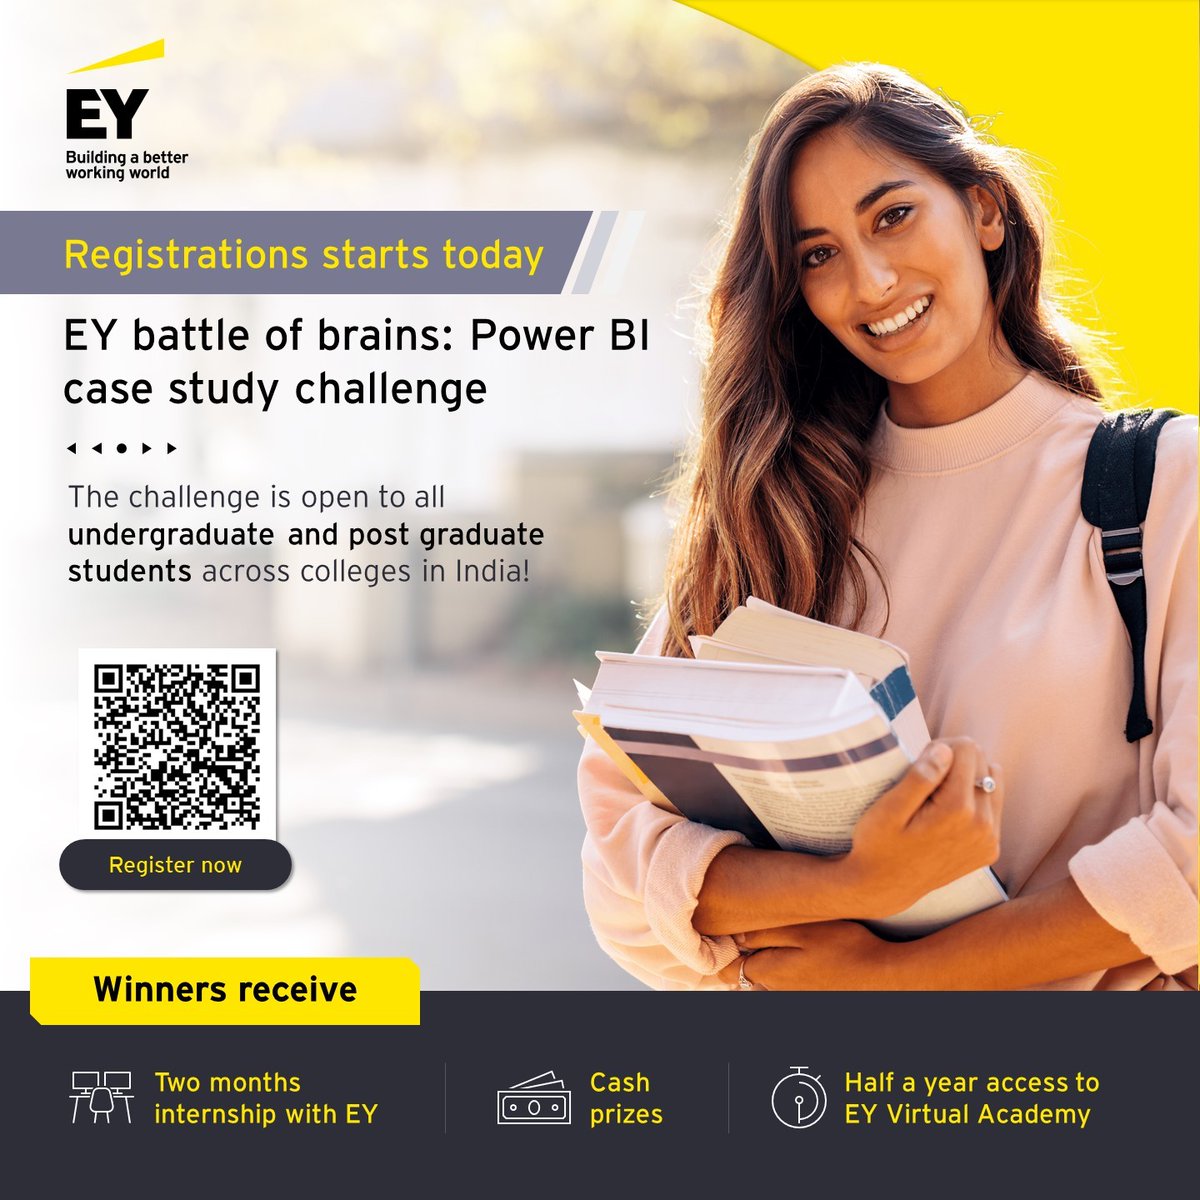 Are you driven by data and ready for a challenge? Unleash your analytical prowess in the Battle of Brains - Power BI Case Study Challenge. 

The last date to register is 19 May 2024. Sign up now: go.ey.com/4aQ1ogX

#BetterWorkingWorld #EYVirtualAcademy